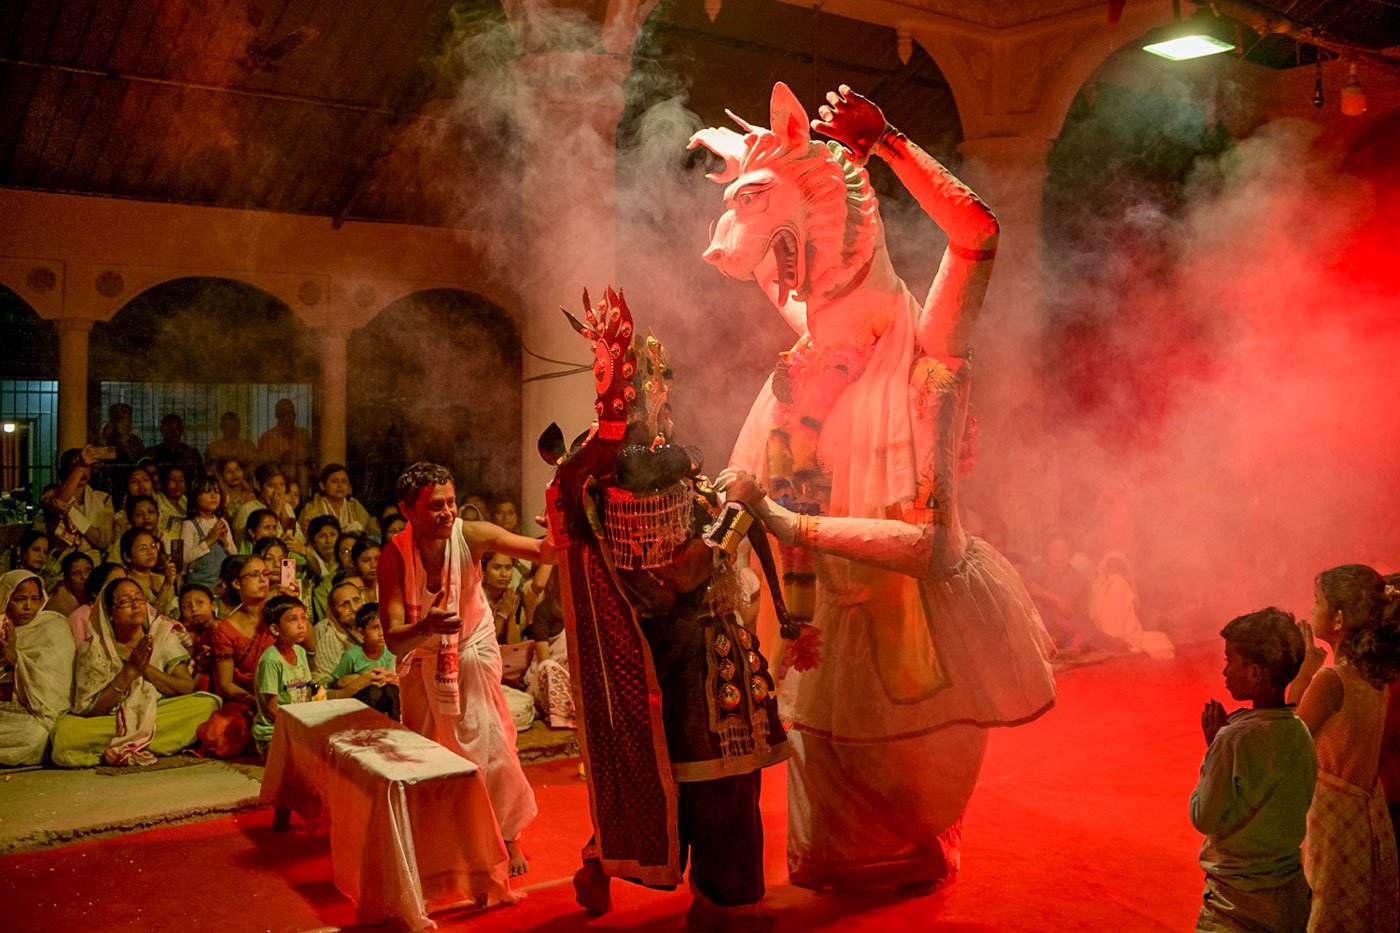 In a scene from the Nri Simha Jatra drama, Dutta (left) helps the actor wearing the mask of the half lion, half human Nri Simha.